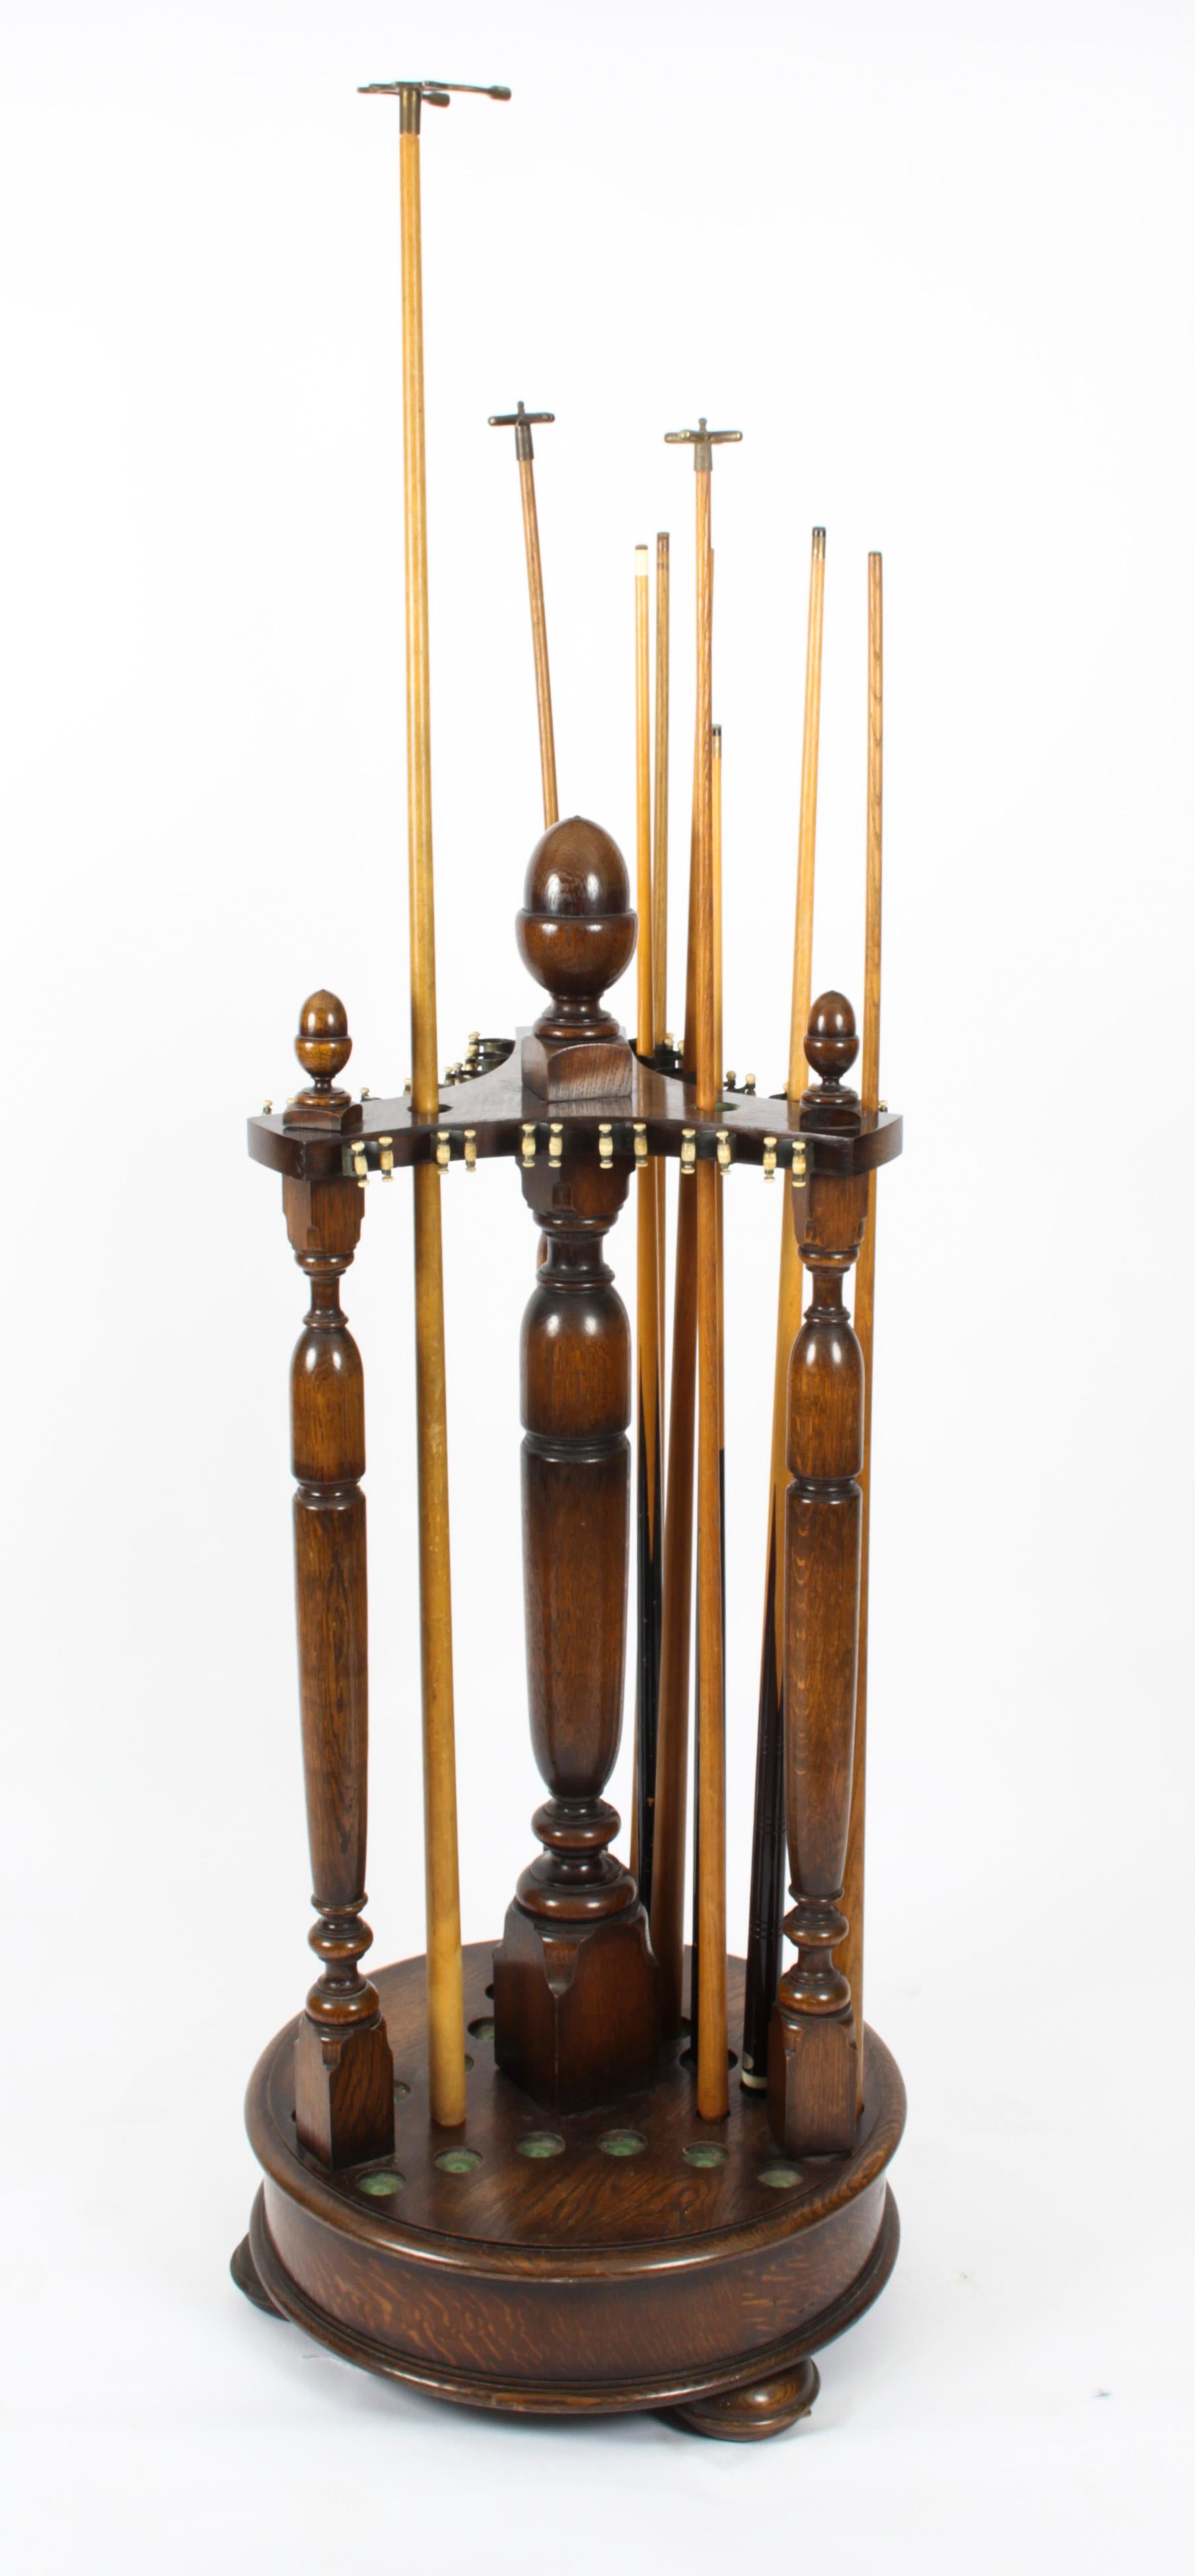 A fine and rare large revolving oak snooker cue stand, late 19th century in date.
 
The circular base revolves to make selecting cues easy and is sitting on three bun feet with turned columns surmounted by acorn finials, racked for 18 cues plus 3